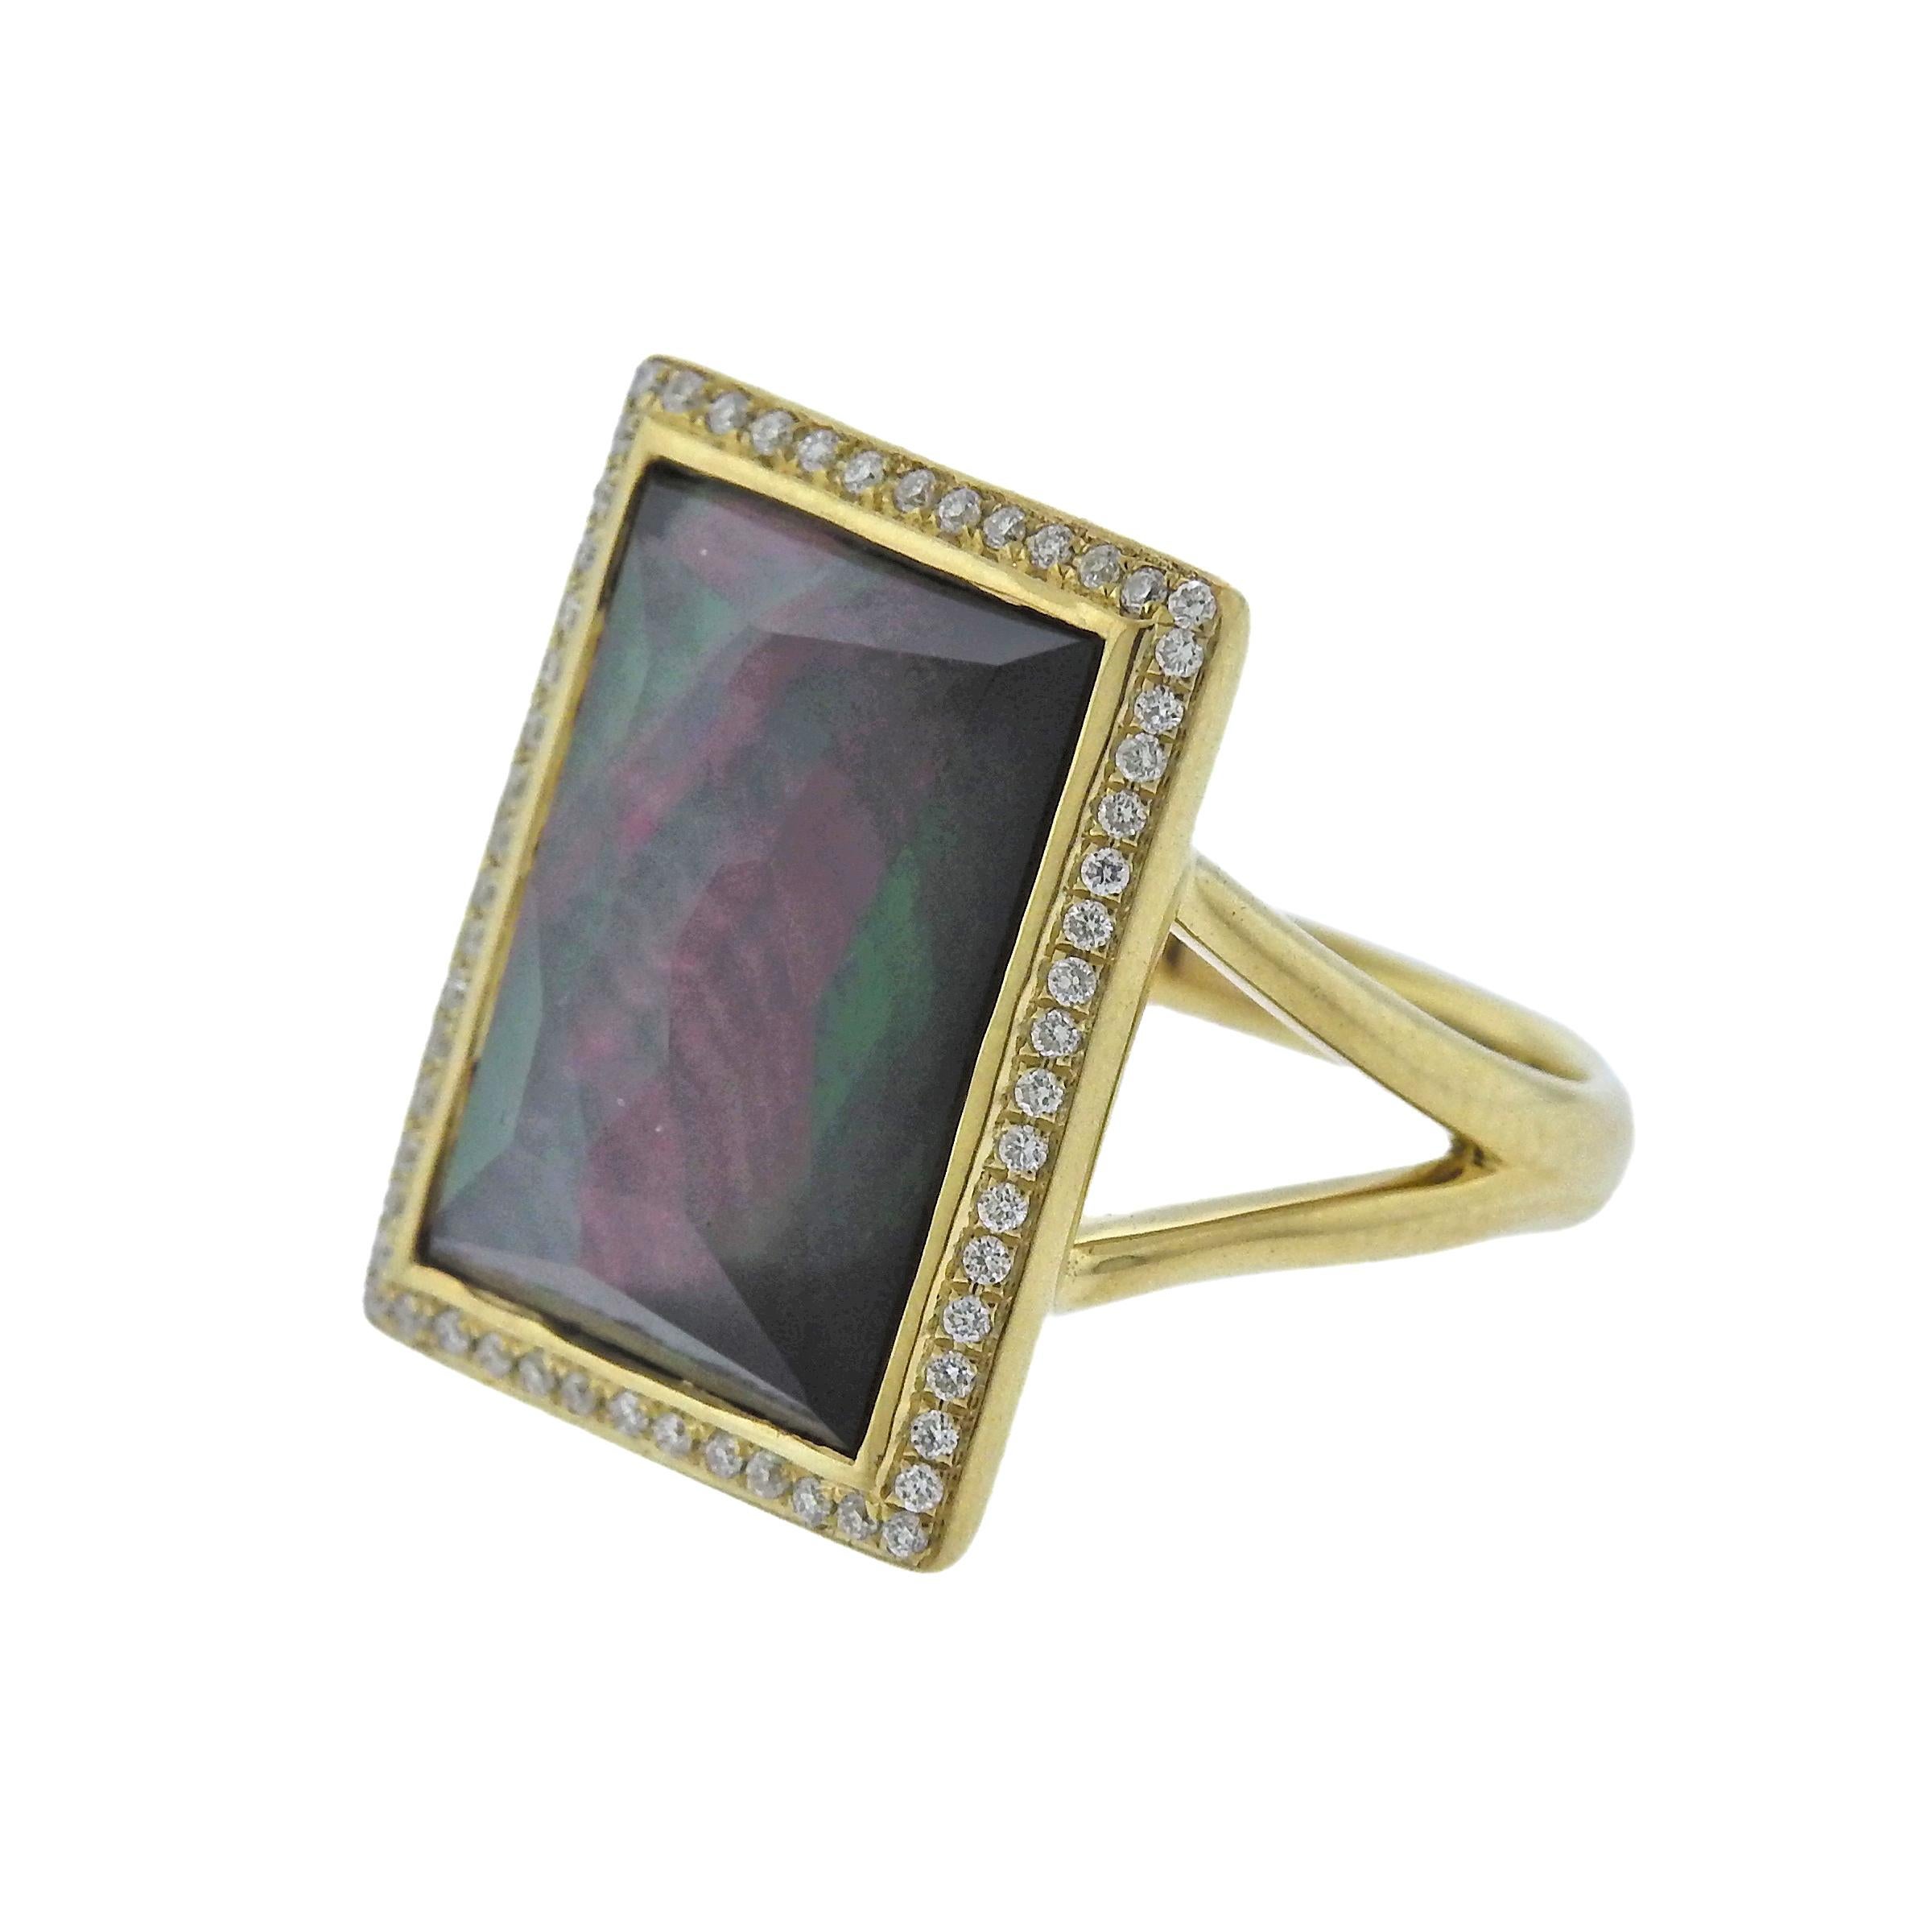 Large 18k gold ring , crafted by Ippolita, set with hematite, quartz, surrounded with approx. 0.21ctw in diamonds. Ring size 7 1/4, ring top - 20mm x 16mm, weight 8.8 grams. Marked Ippolita and 18k. Retail $3295. Comes with Pouch.